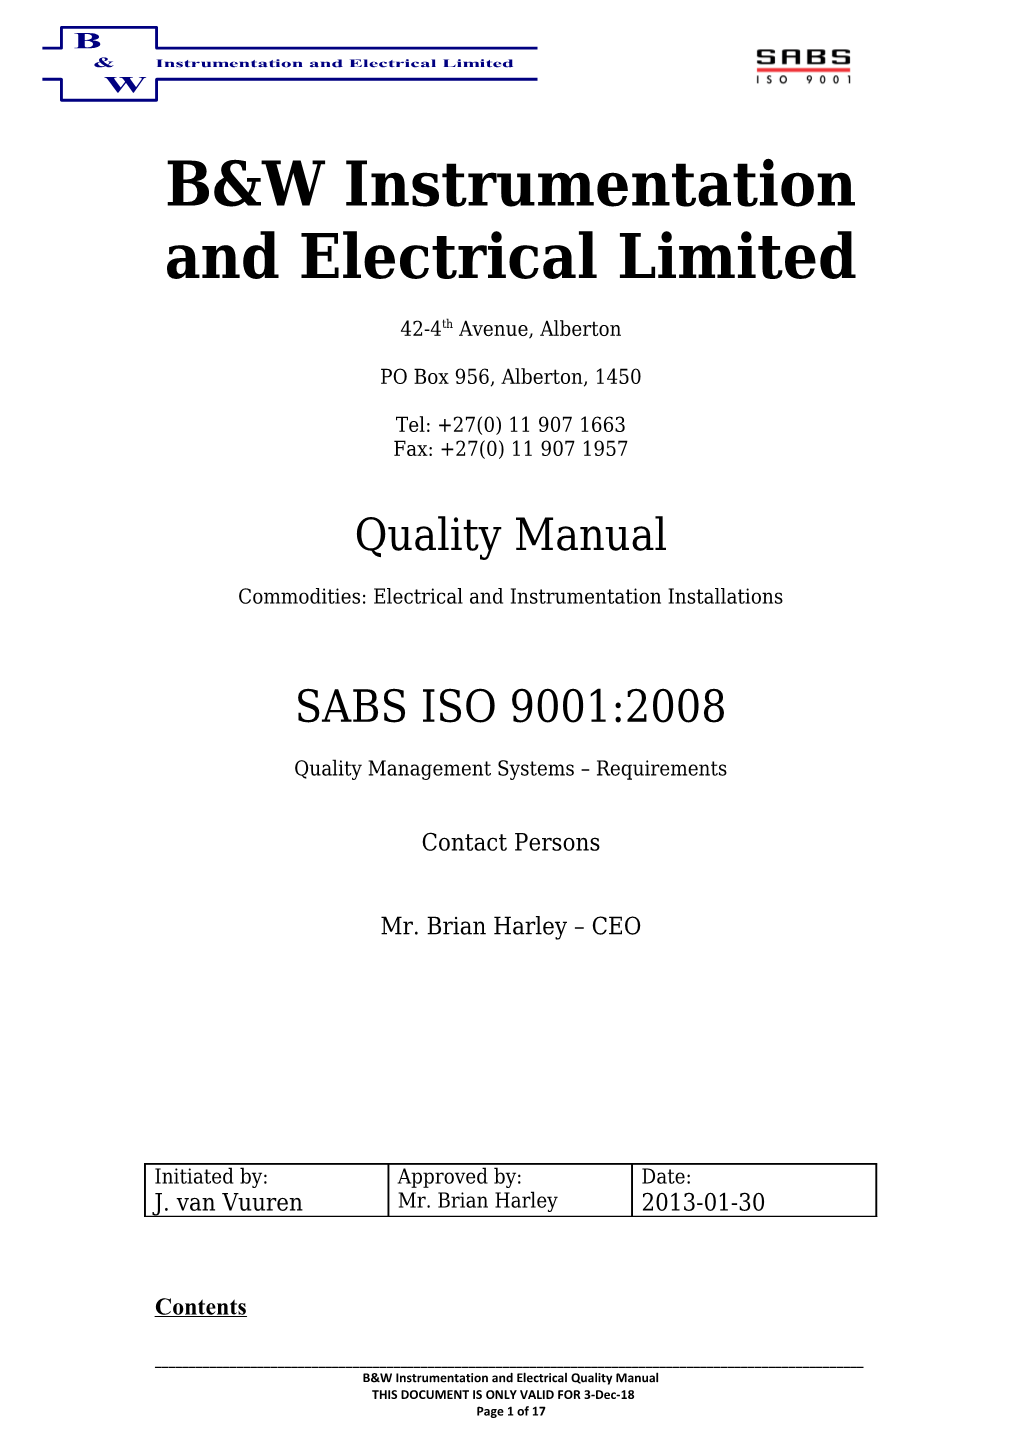 B&W Instrumentation and Electrical Limited